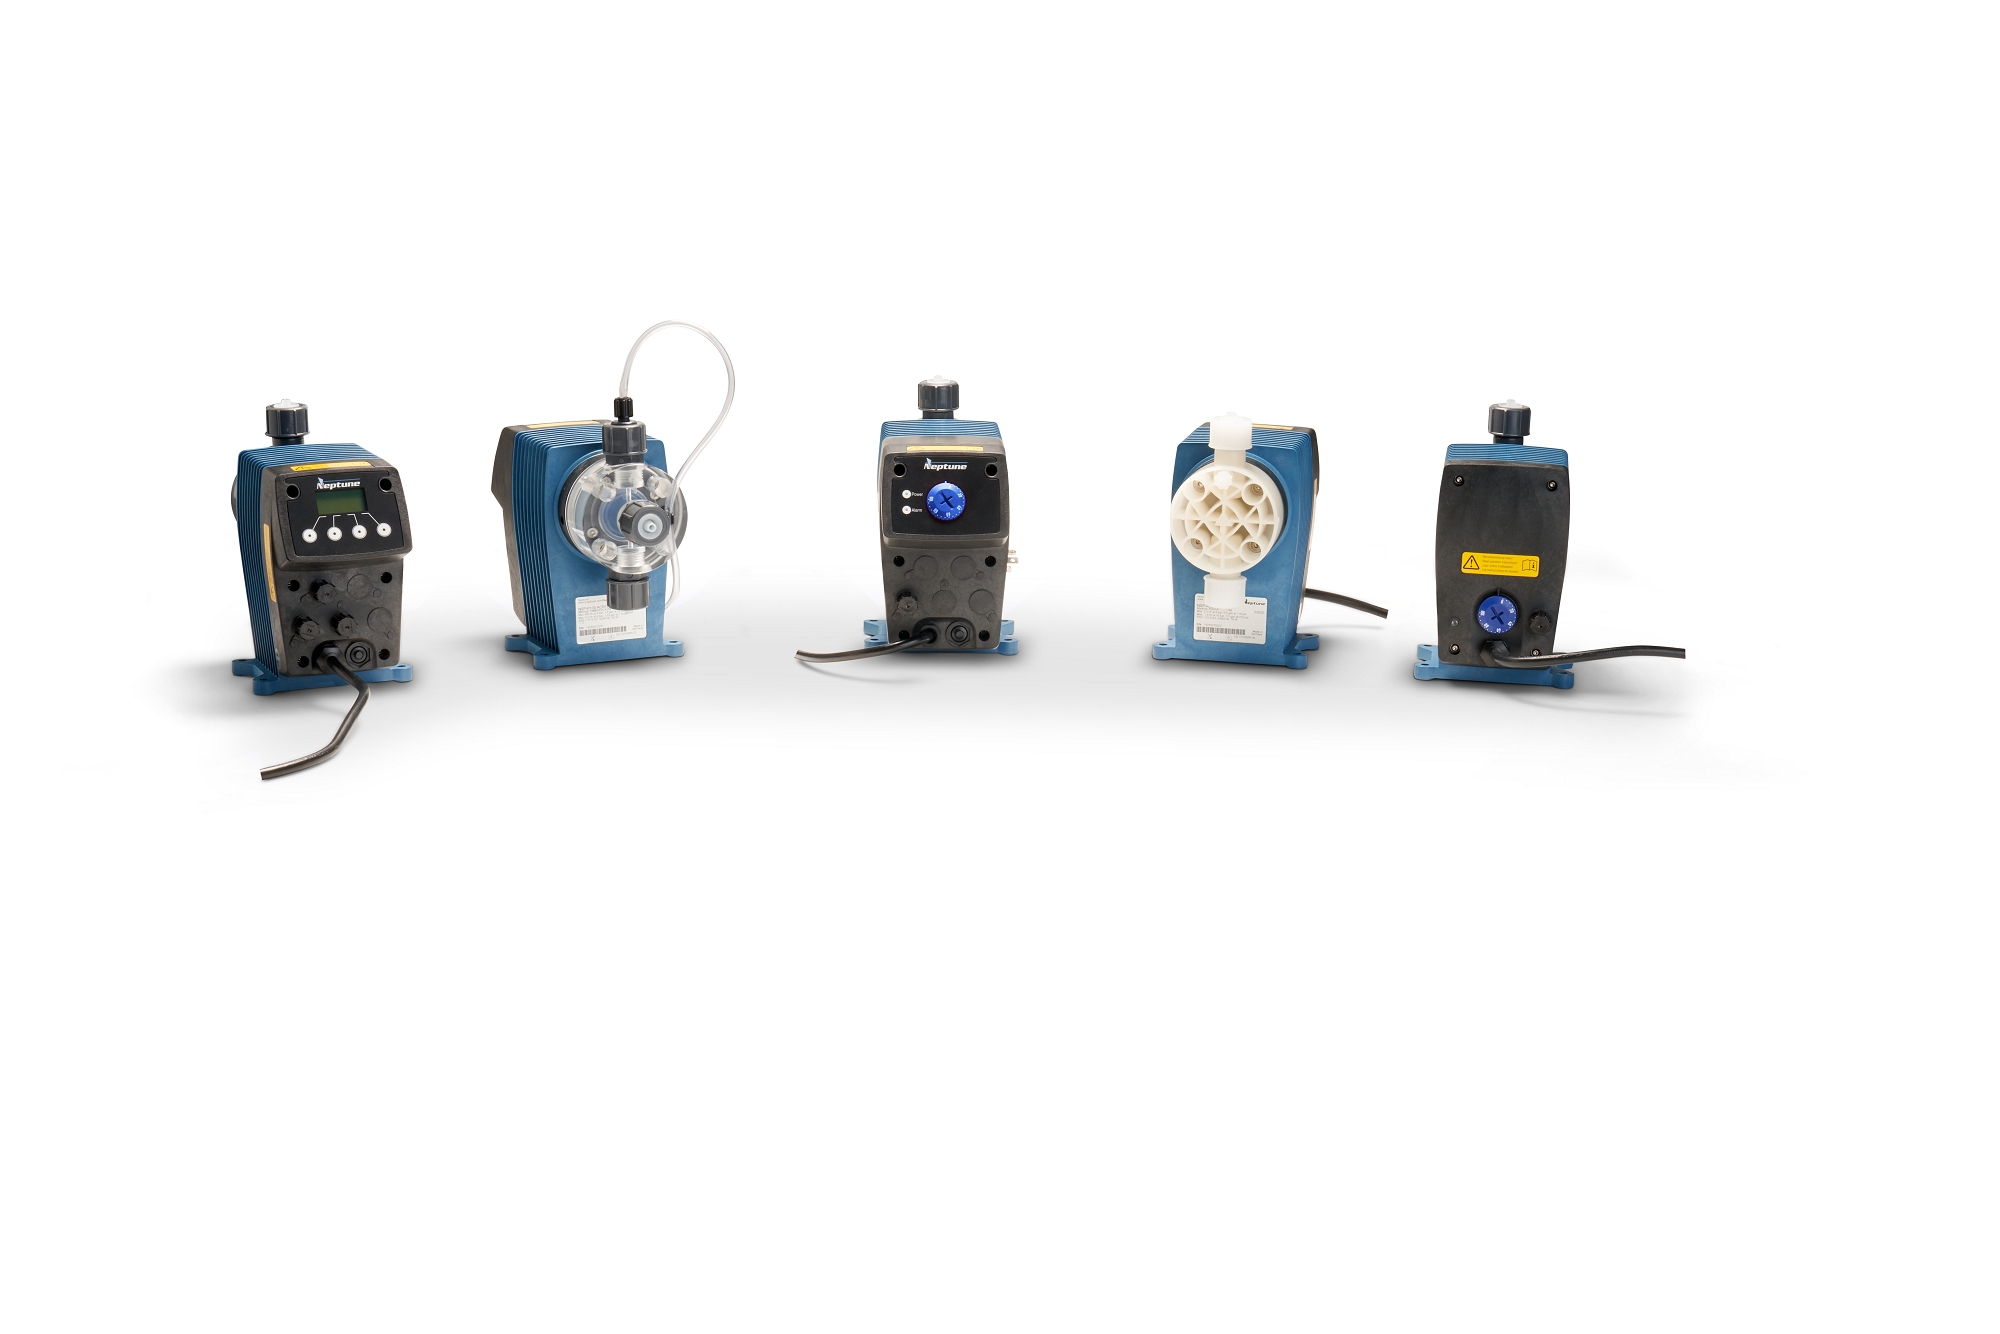 There are 35 additional models as part of the Phase II release of the NSP Series Solenoid Metering Pumps and NXP Series Stepper Motor-Driven Metering Pumps.